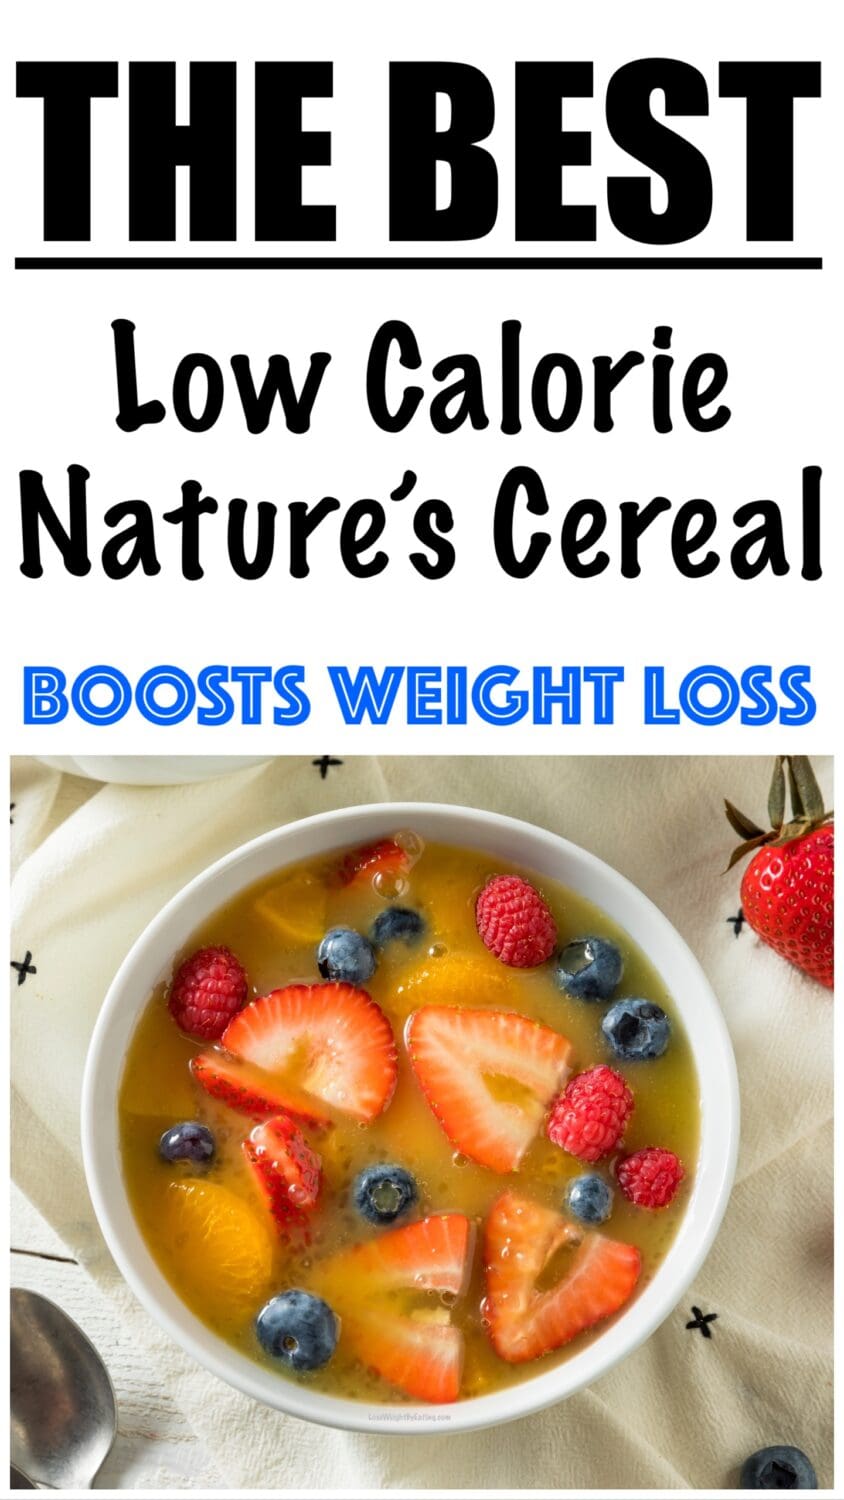 Low Calorie Natures Cereal for Weight Loss